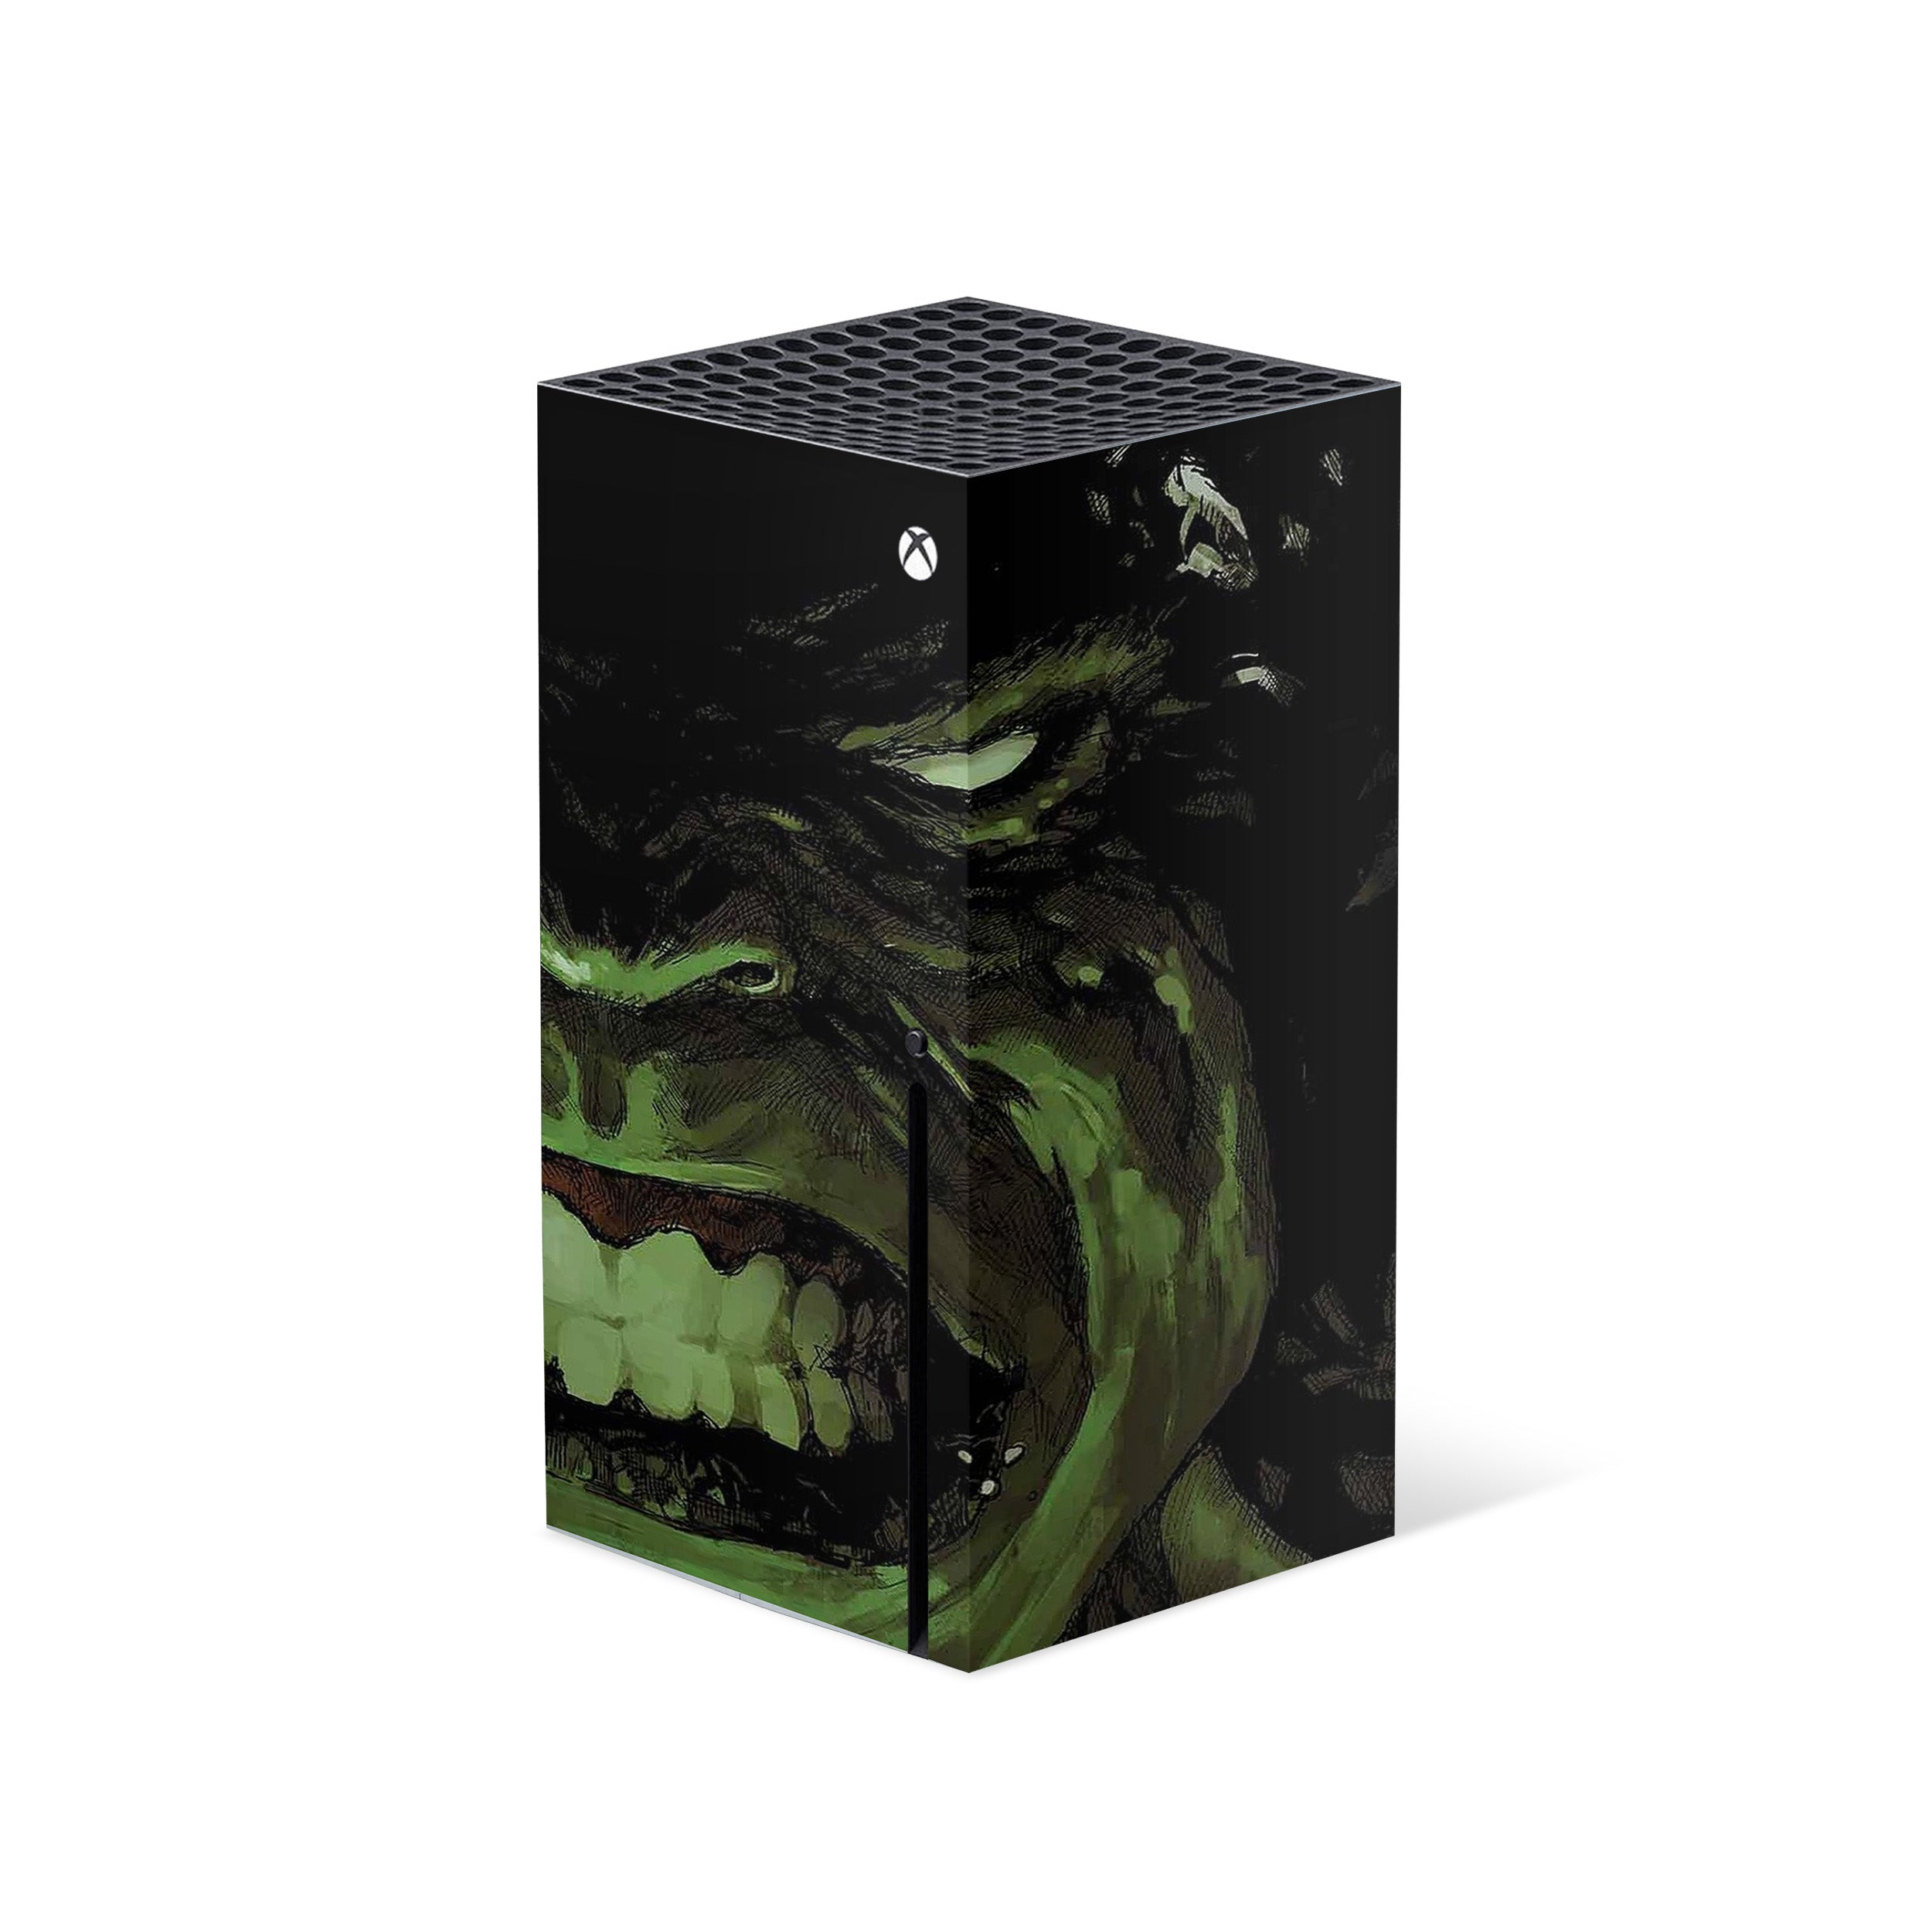 A video game skin featuring a Marvel Hulk design for the Xbox Series X.